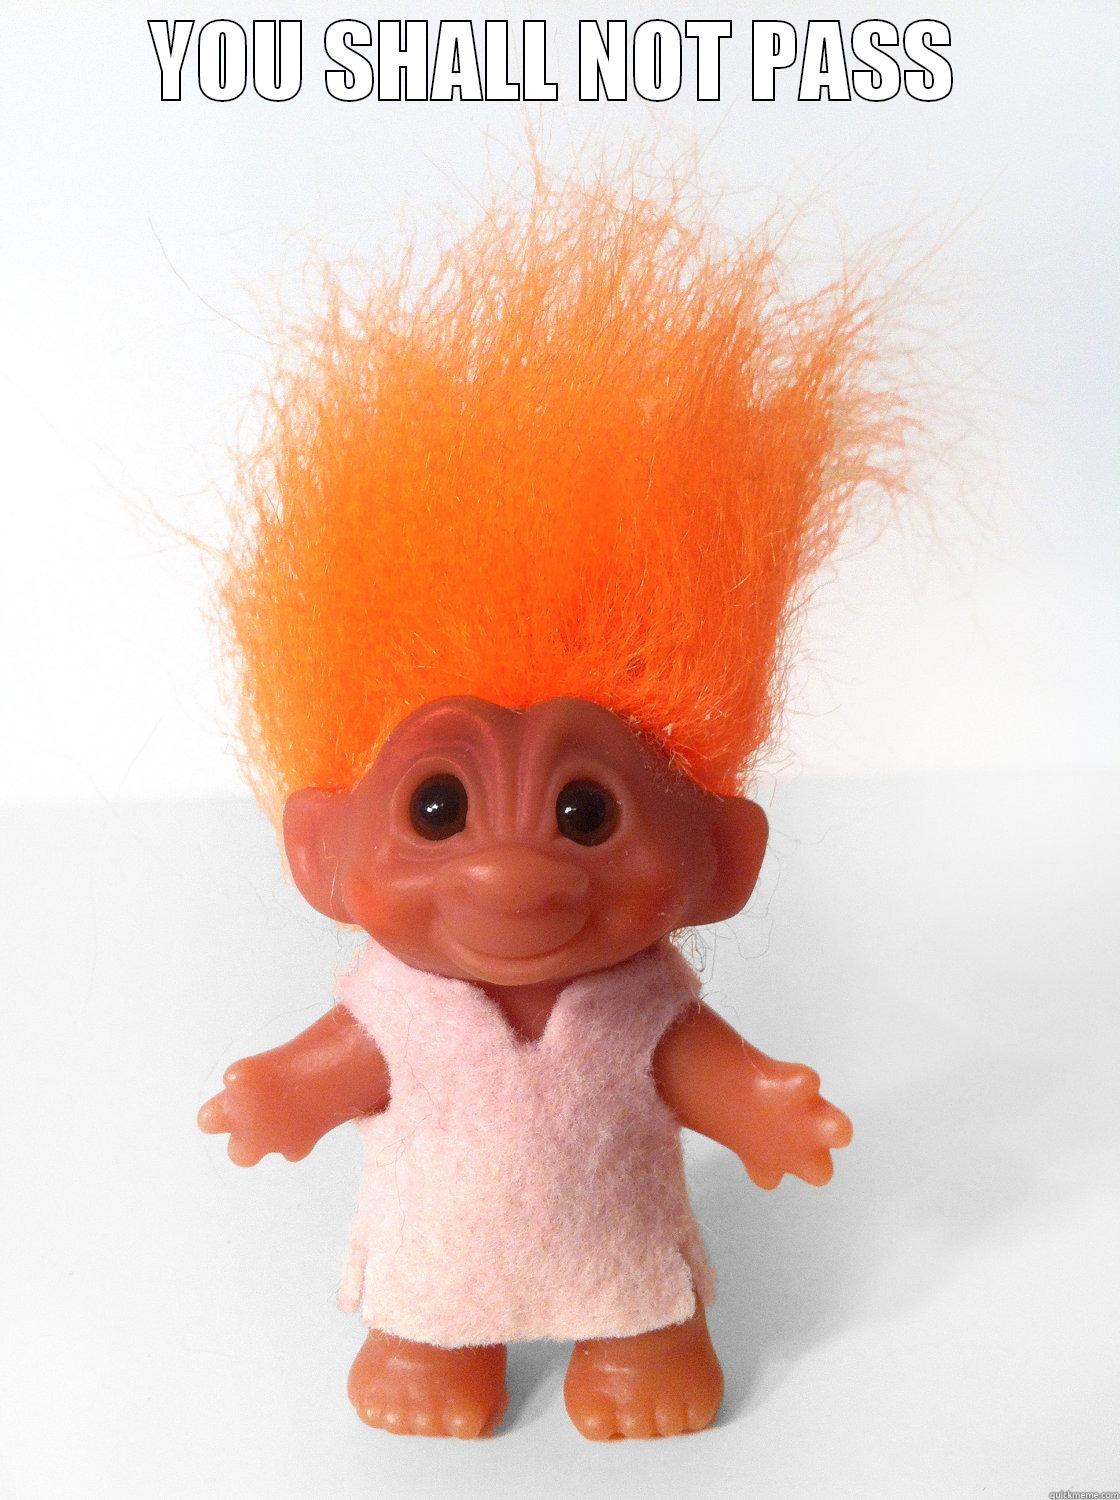 Troll doll meme - YOU SHALL NOT PASS  Misc